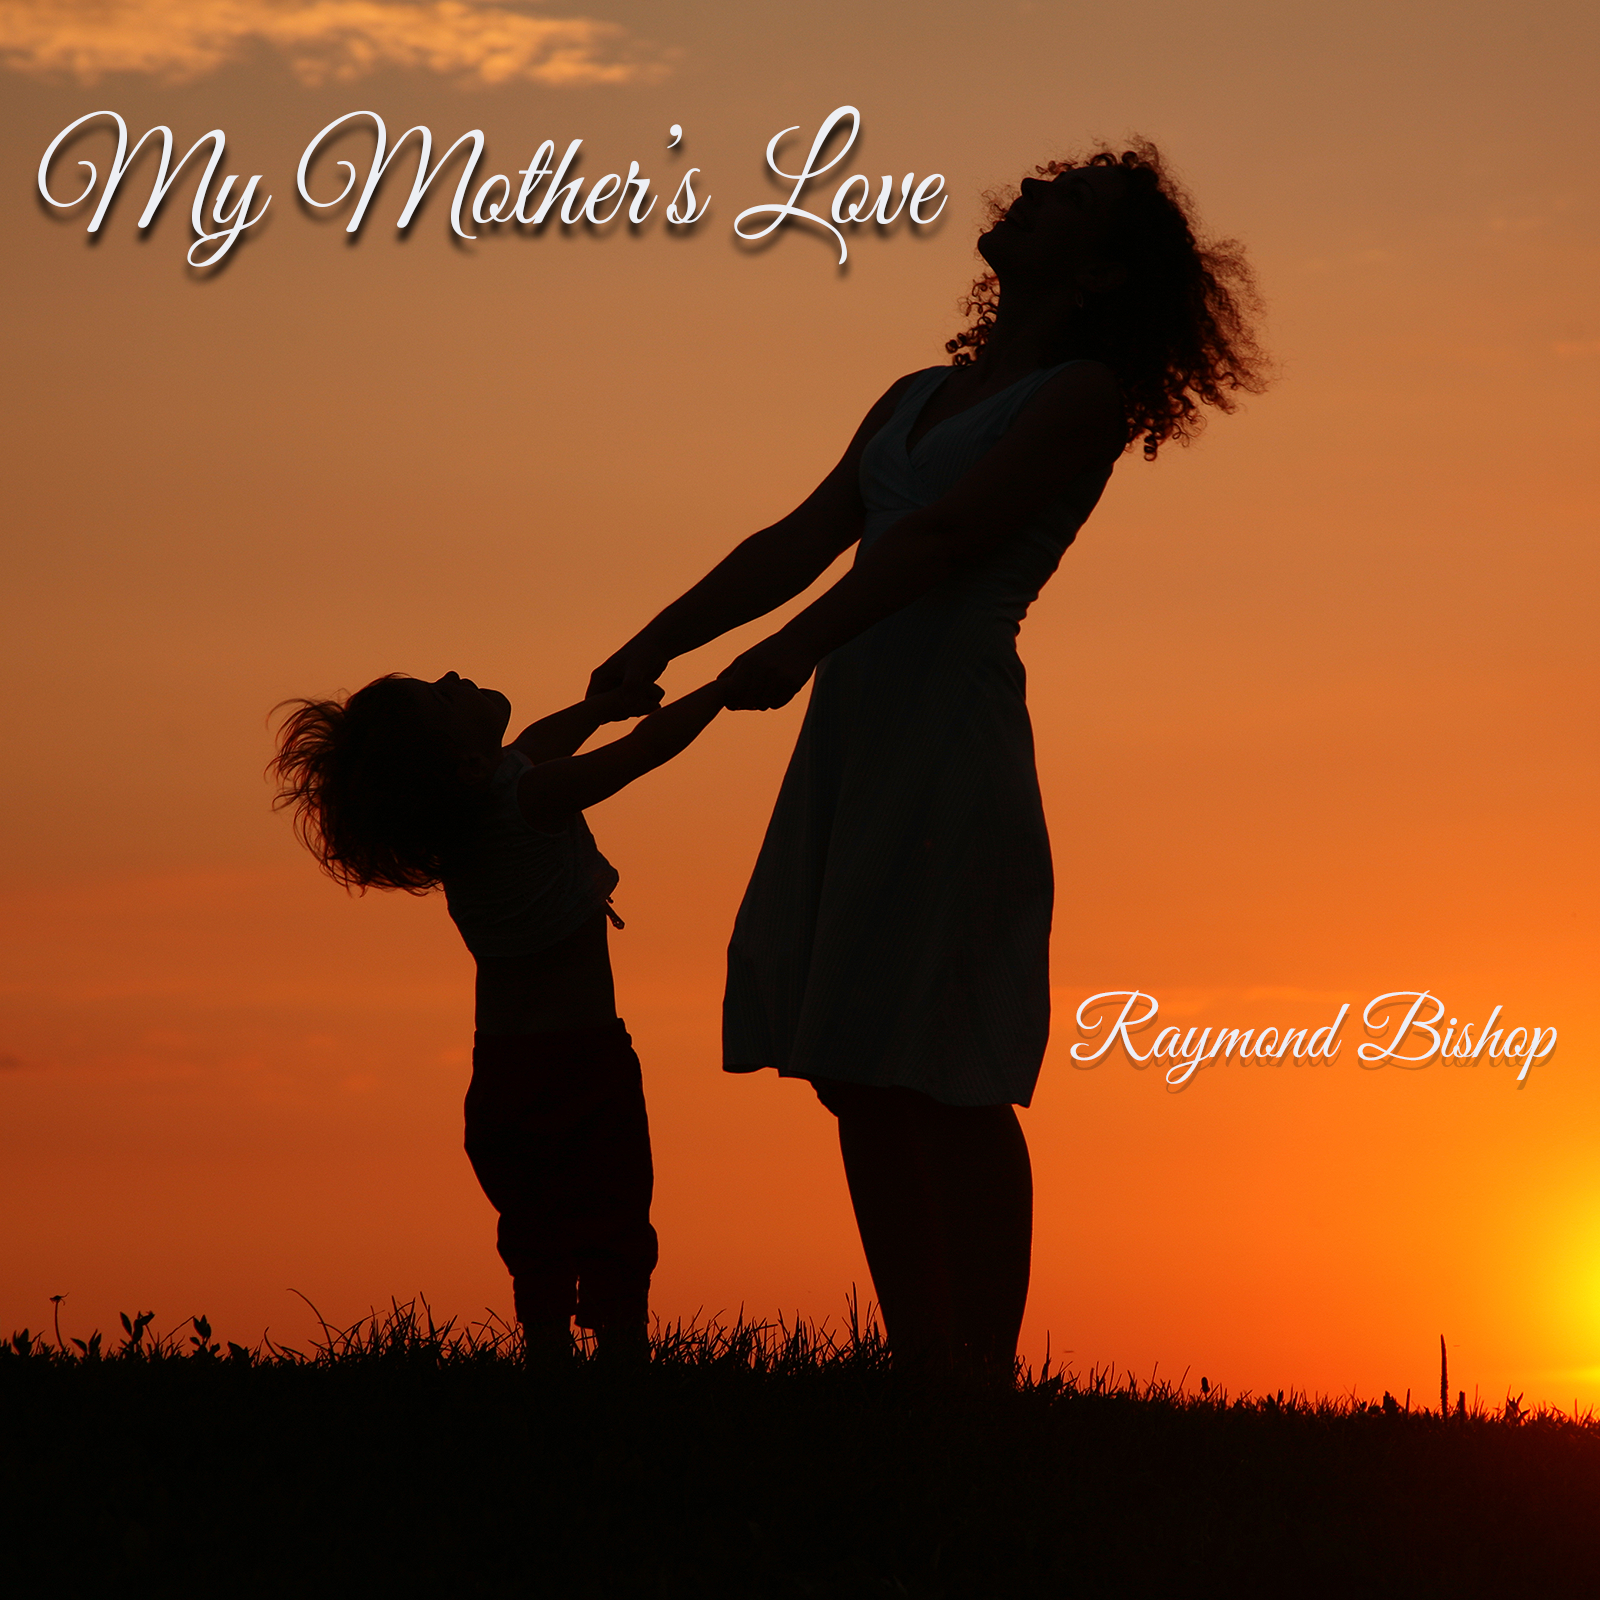 My Mother’s Love by Raymond Bishop